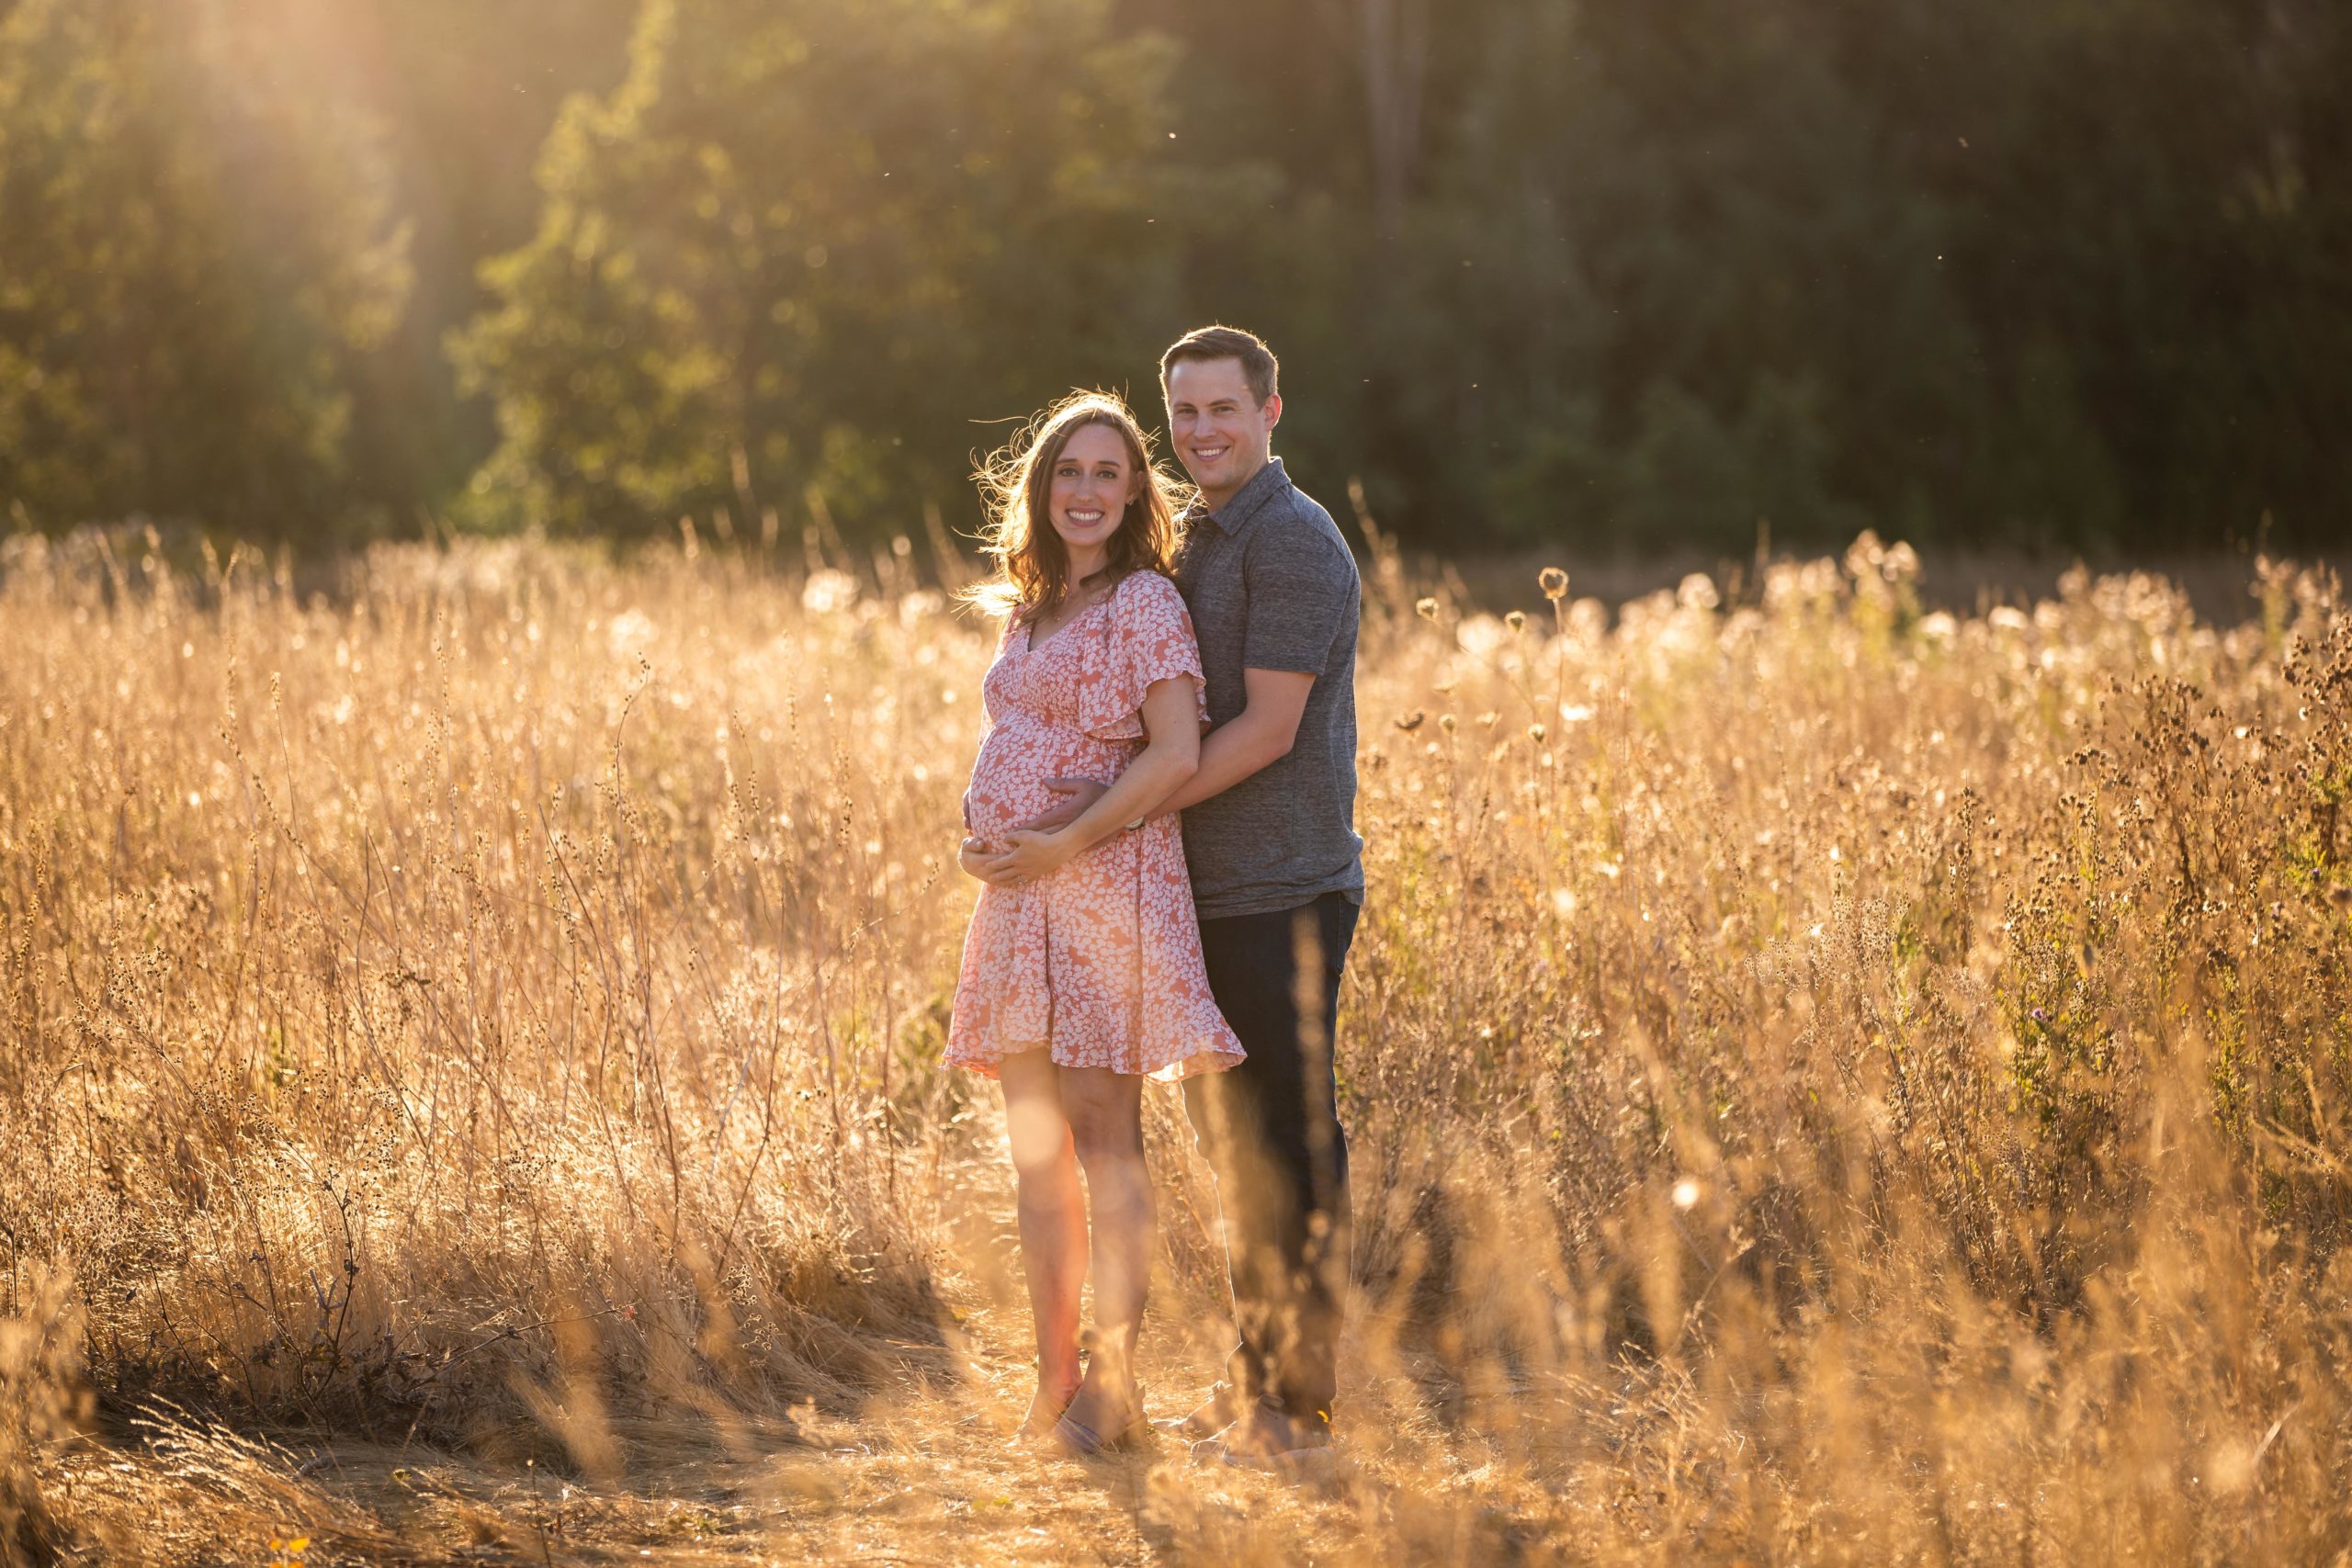 Maternity photography at a field in Portland, Oregon